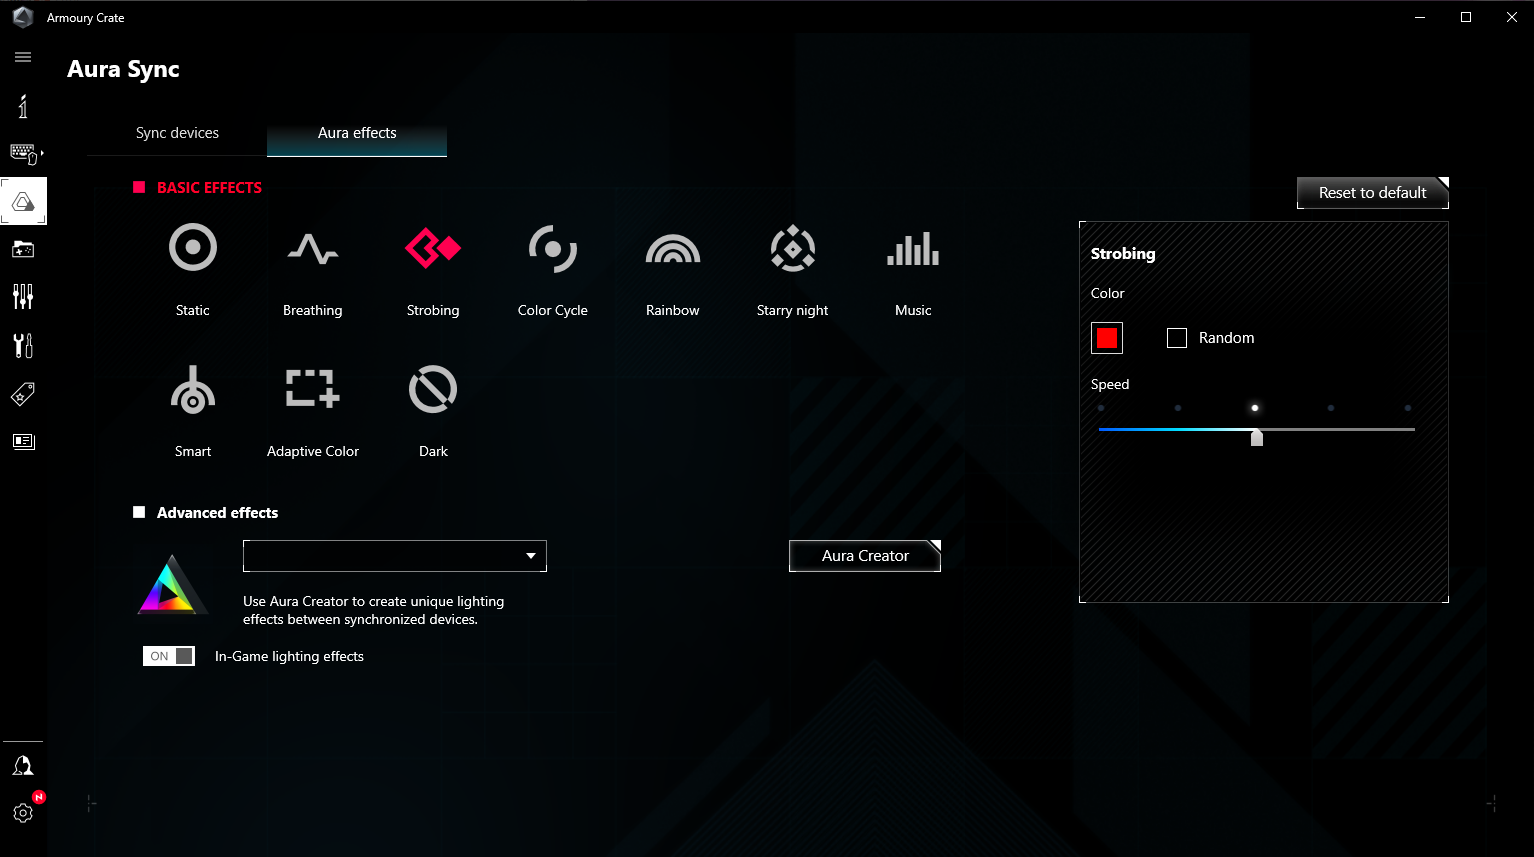 The user interface of ASUS Aura Sync